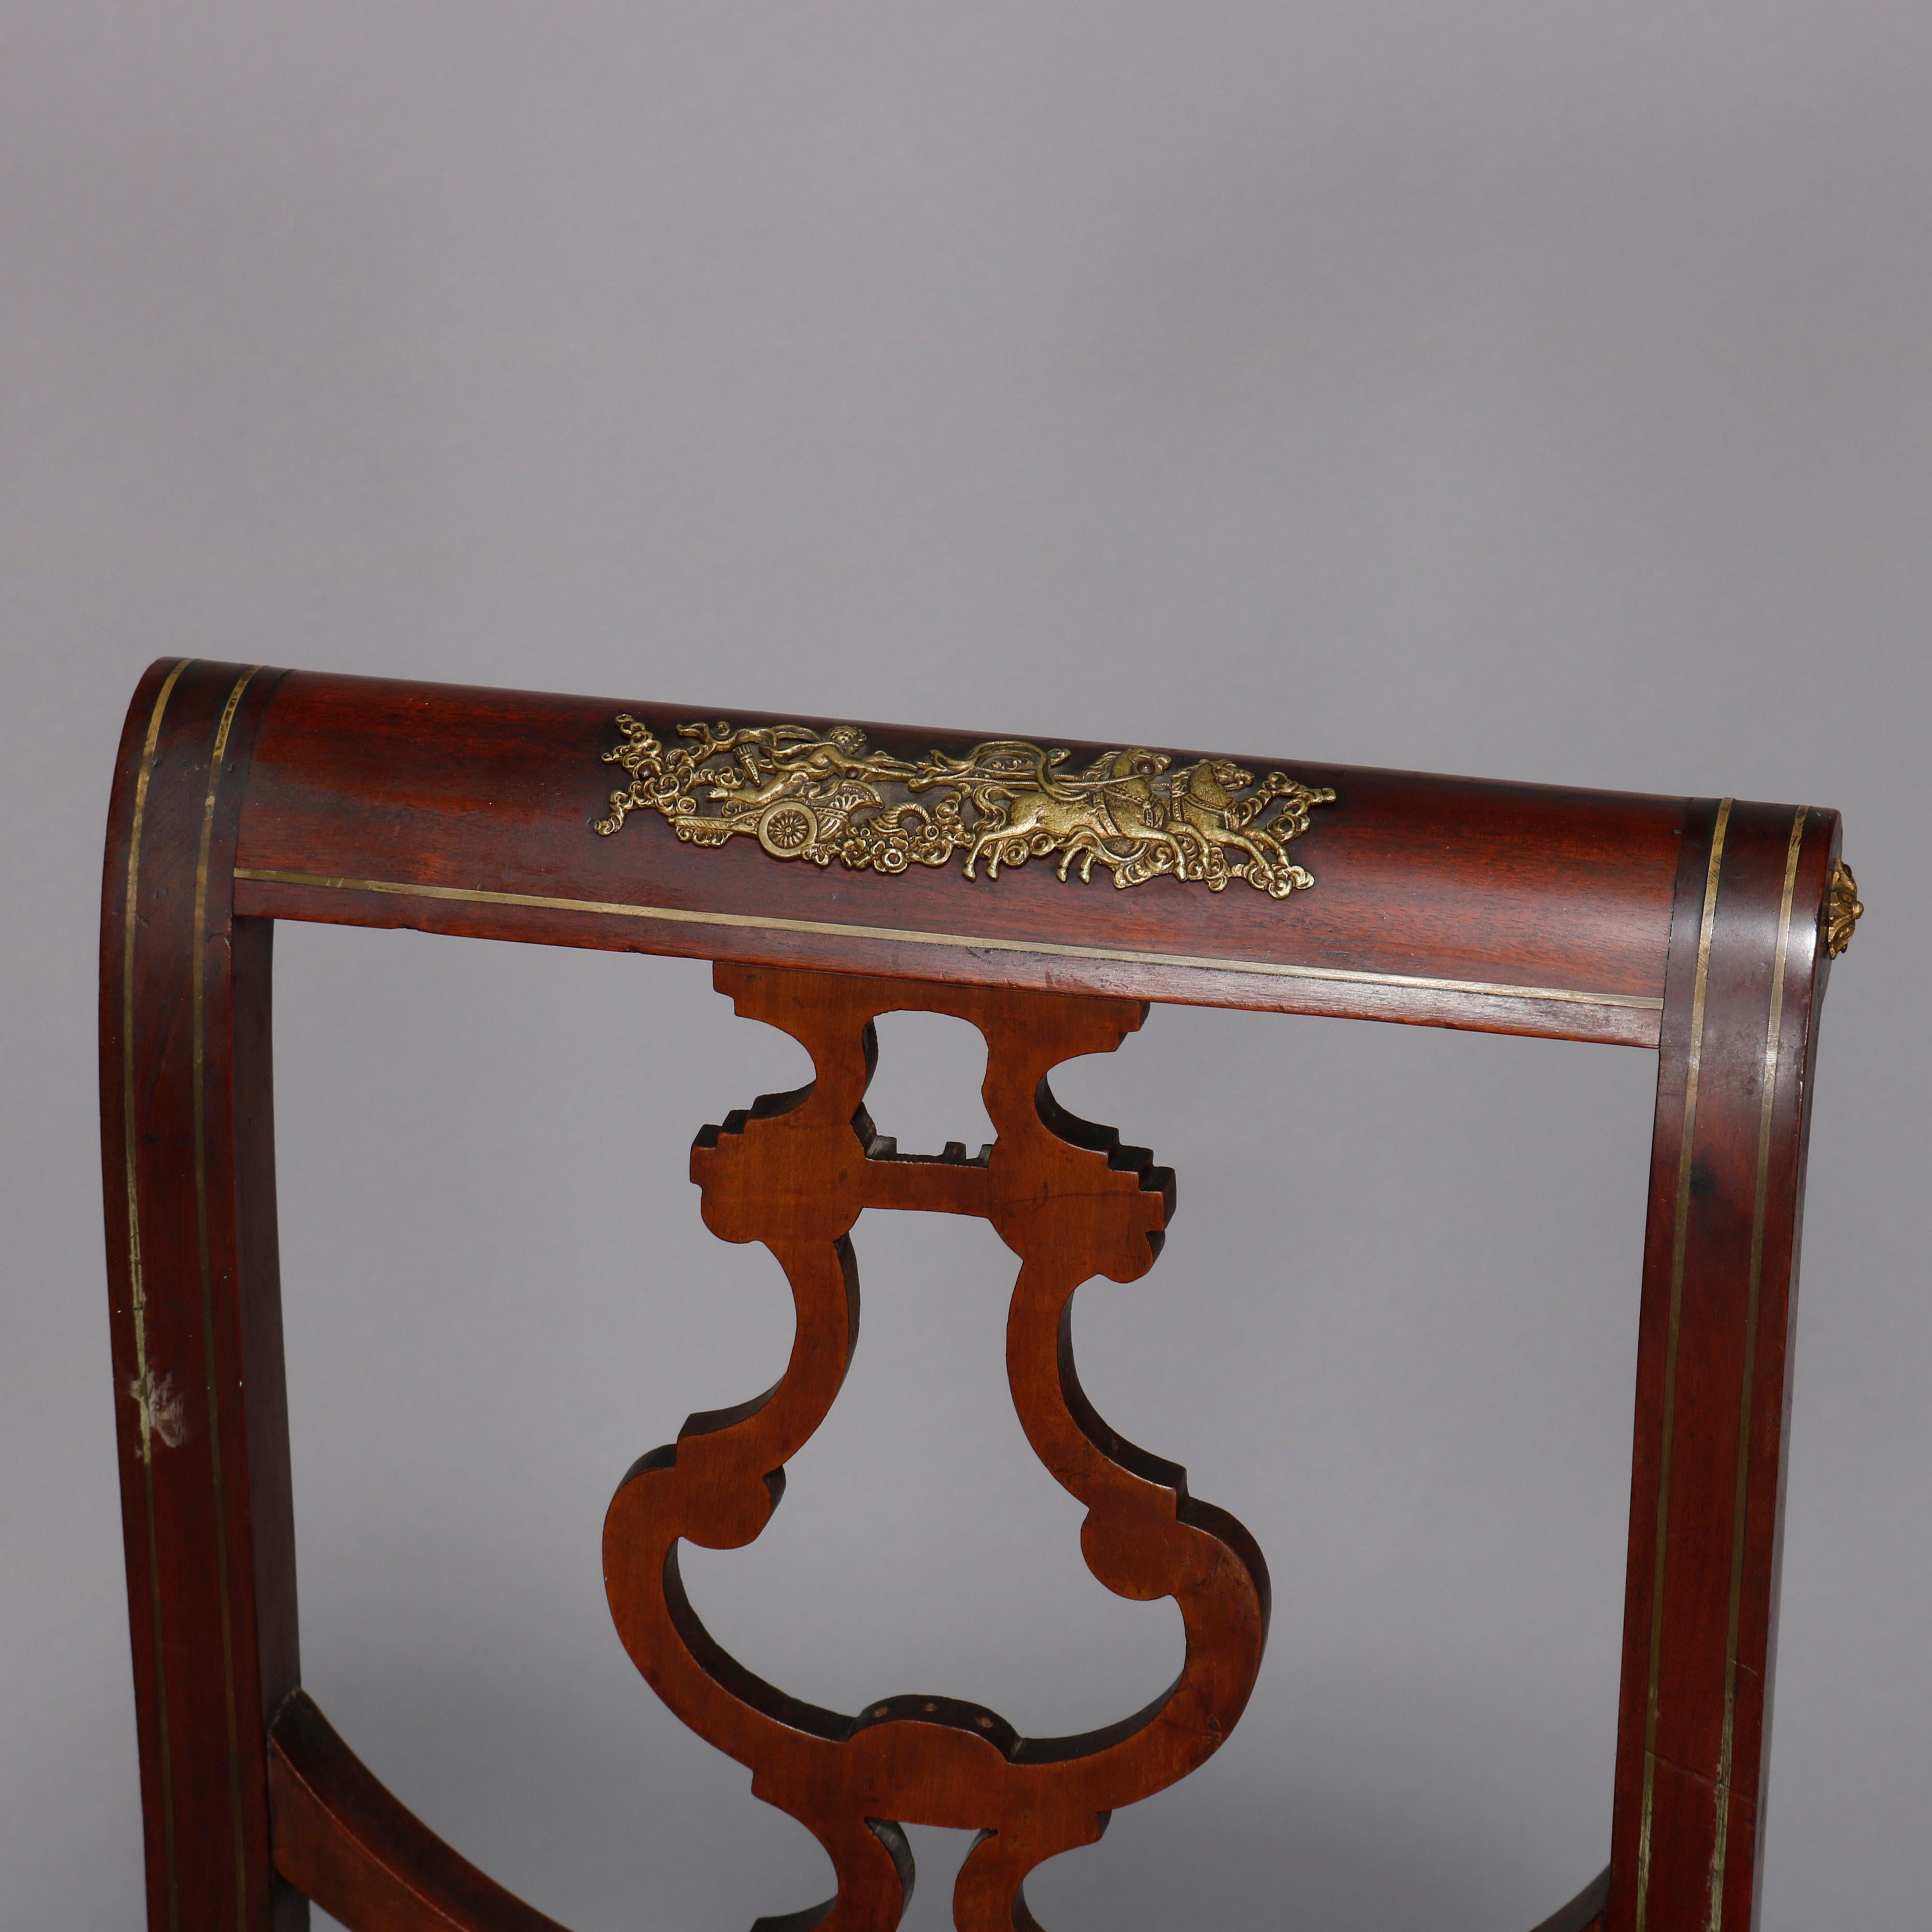 An antique French Empire side chair offers mahogany construction having stylized urn form back slat and foliate cast ormolu mounts throughout, 19th century

Measures - 35.75